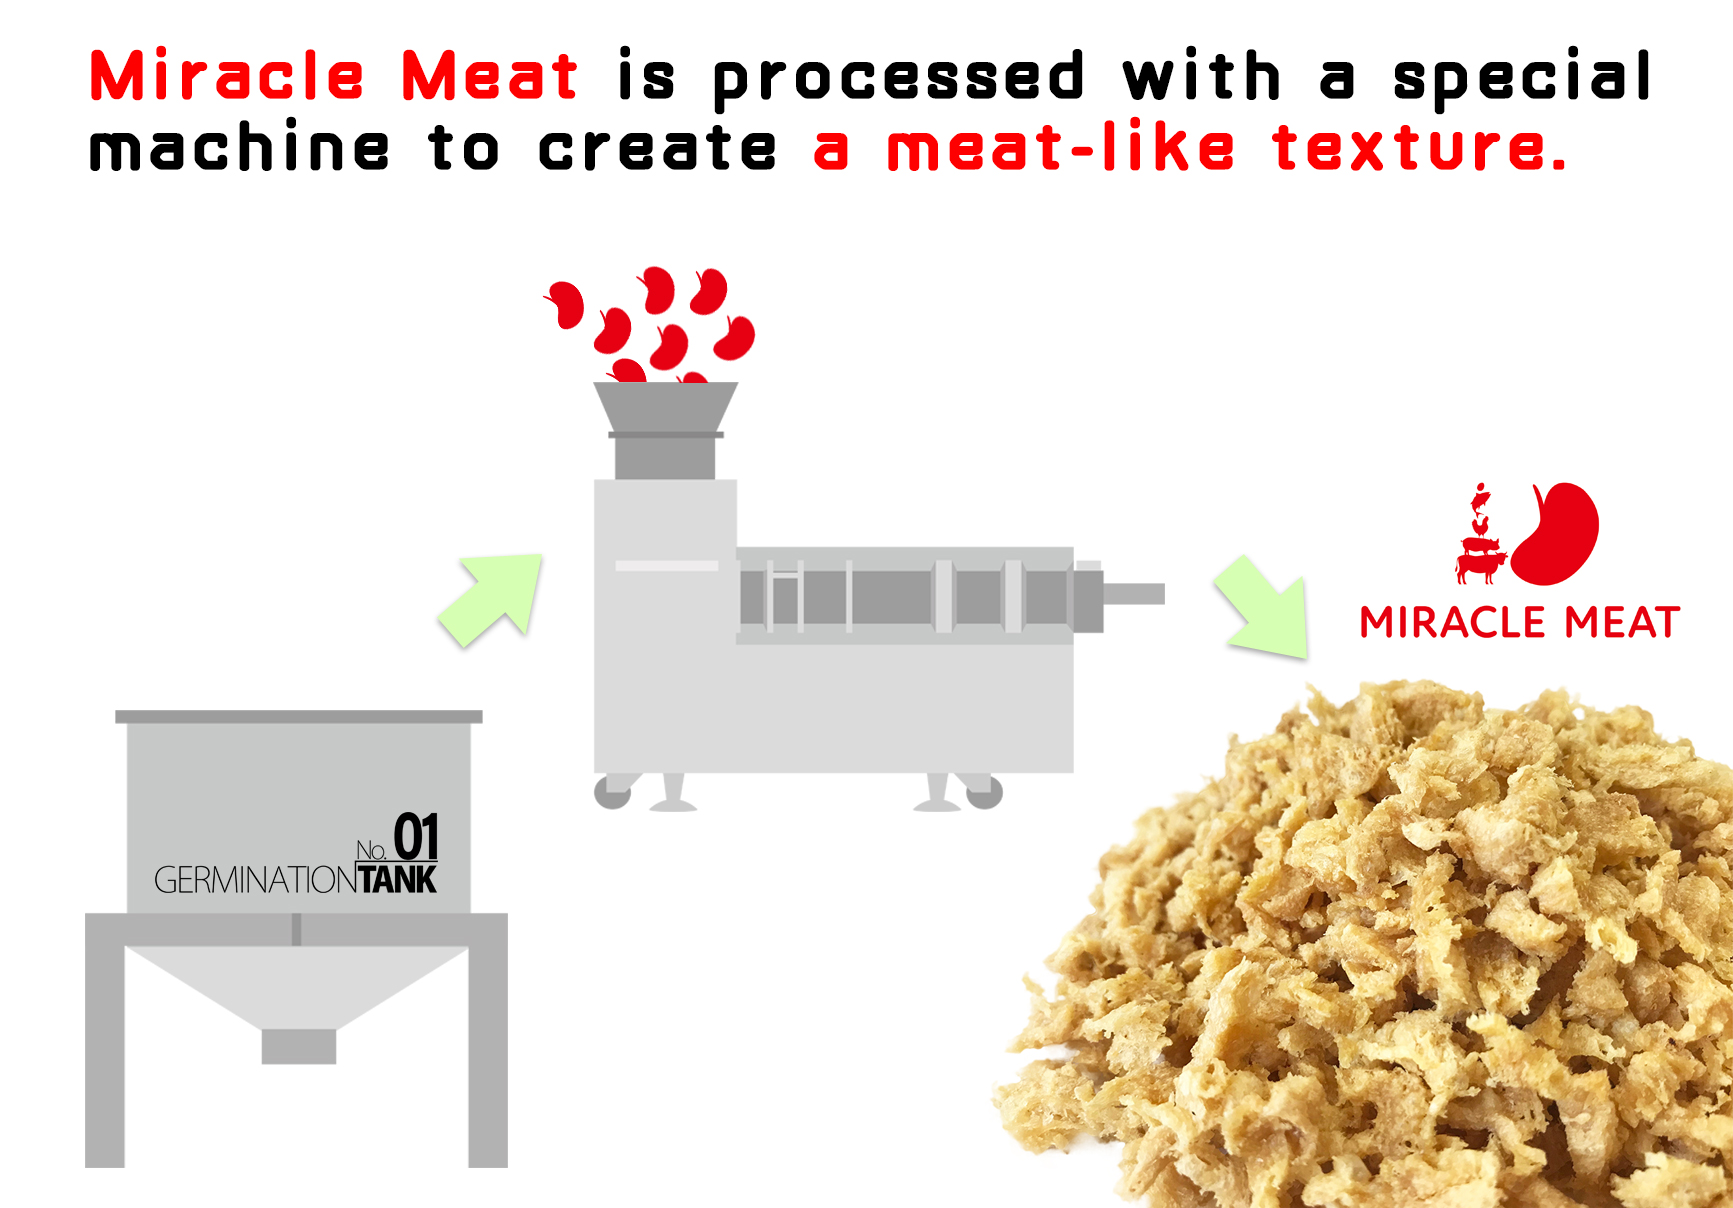 Miracle Meat is processed with a special machine to create a meat-like texture.